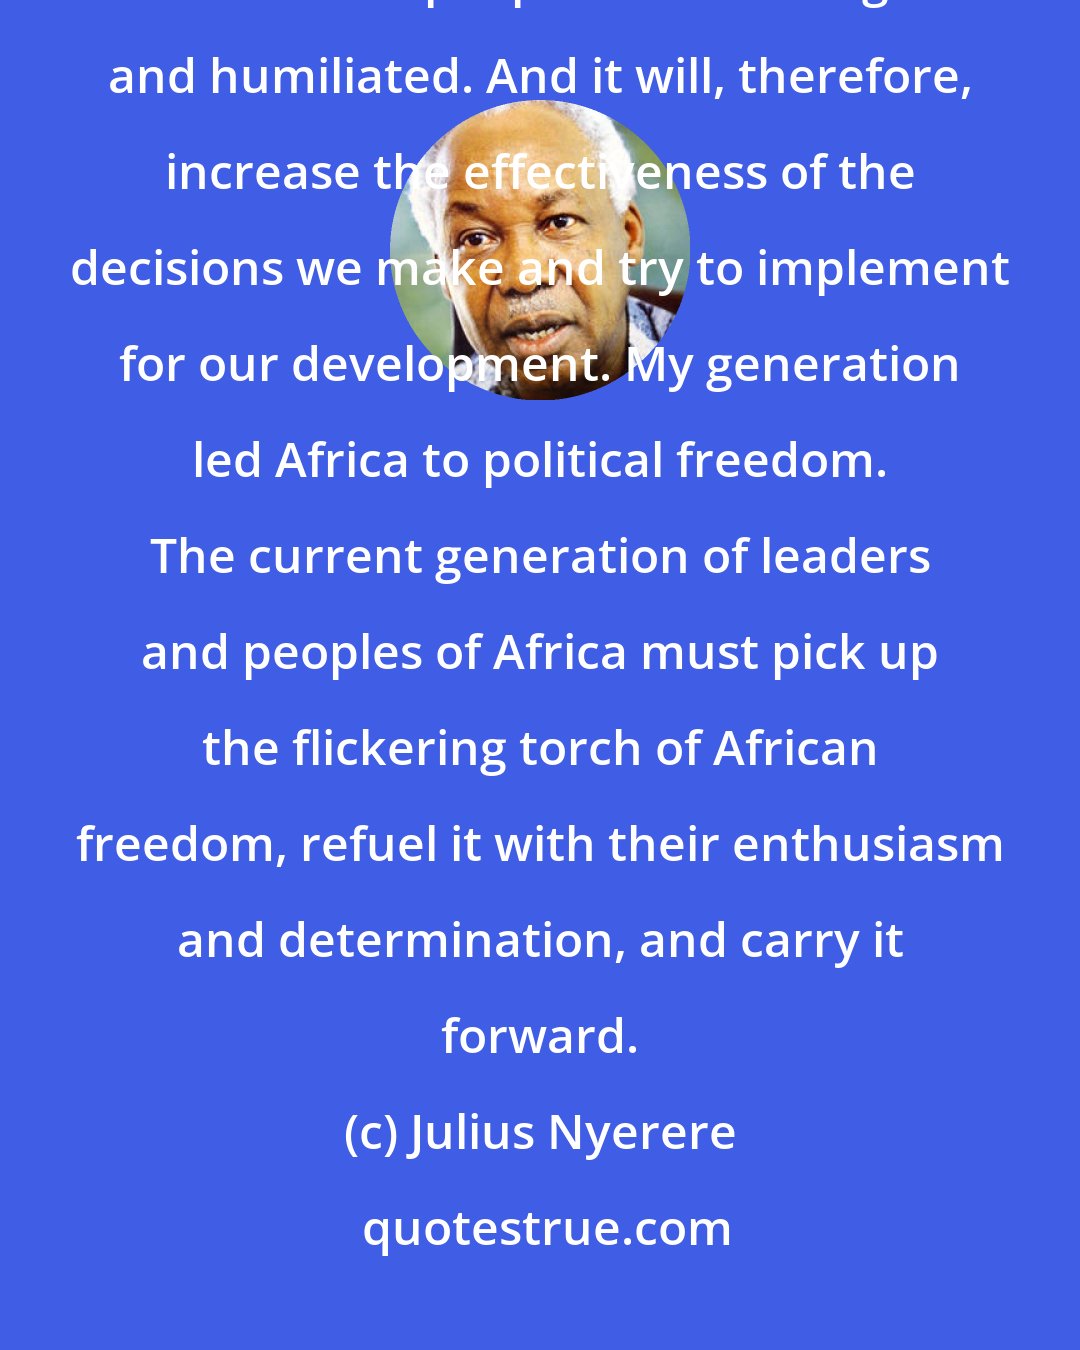 Julius Nyerere: Unity will not make us rich, but it can make it difficult for Africa and the African peoples to be disregarded and humiliated. And it will, therefore, increase the effectiveness of the decisions we make and try to implement for our development. My generation led Africa to political freedom. The current generation of leaders and peoples of Africa must pick up the flickering torch of African freedom, refuel it with their enthusiasm and determination, and carry it forward.